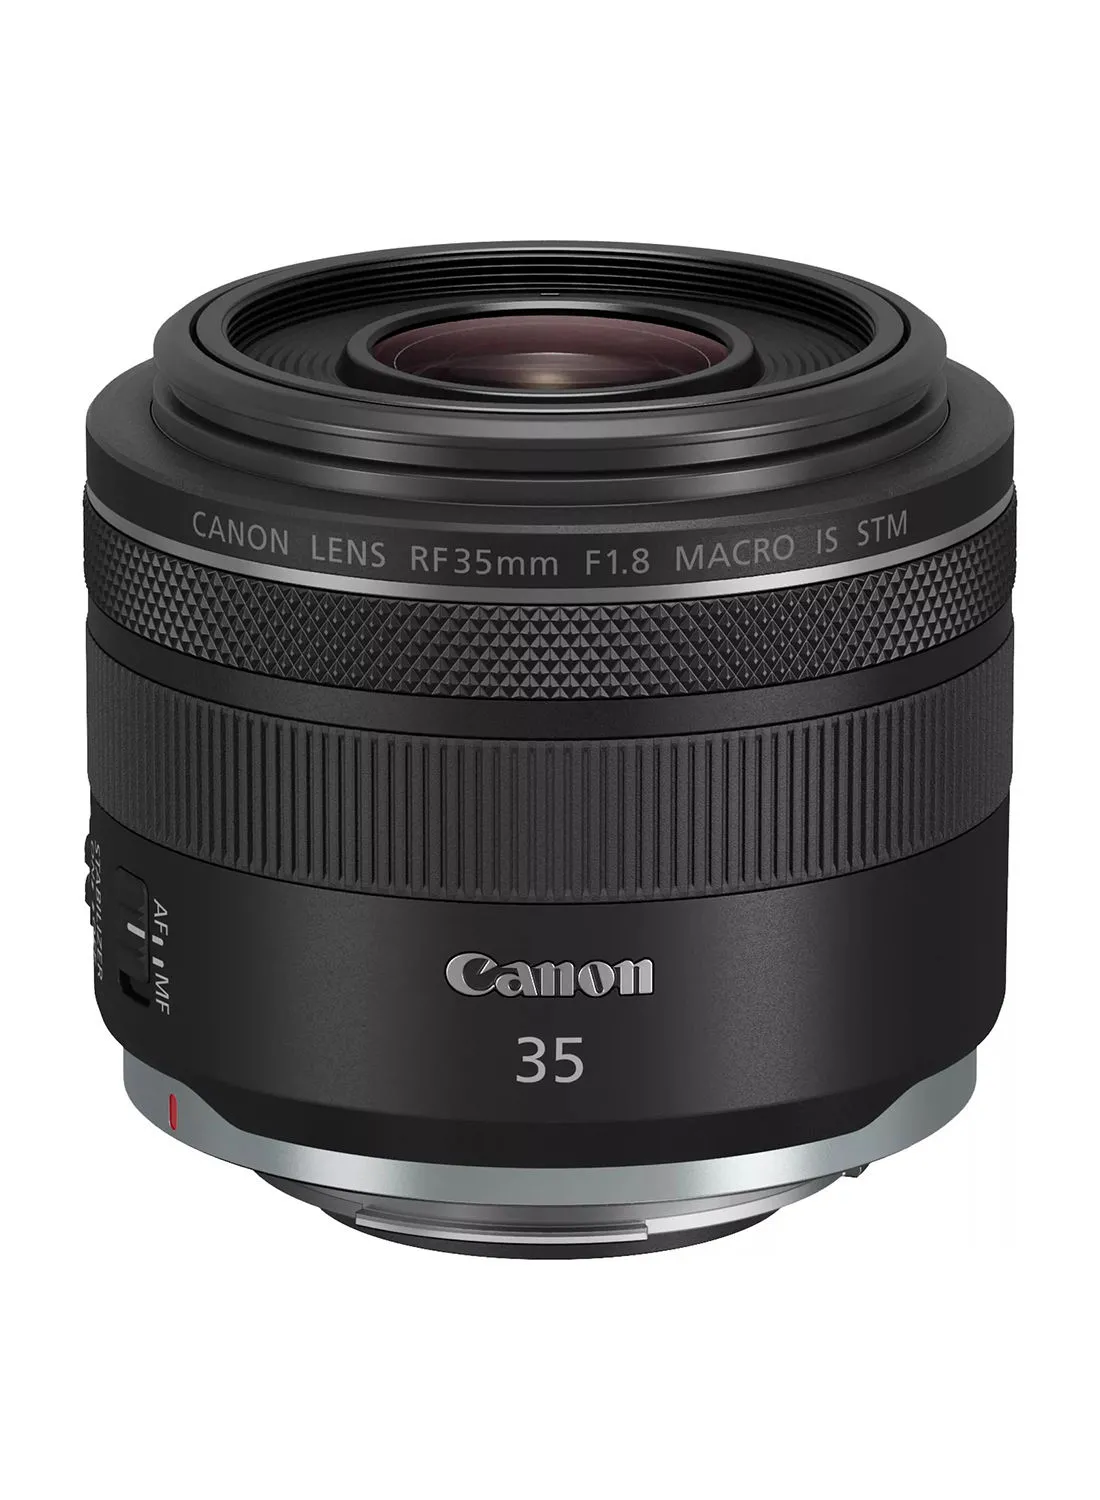 Canon RF 35mm F1.8 IS Macro STM Lens، Enthusiast Level، Hybrid IS، STM Focusing، Great for Street، Travel & Macro Black